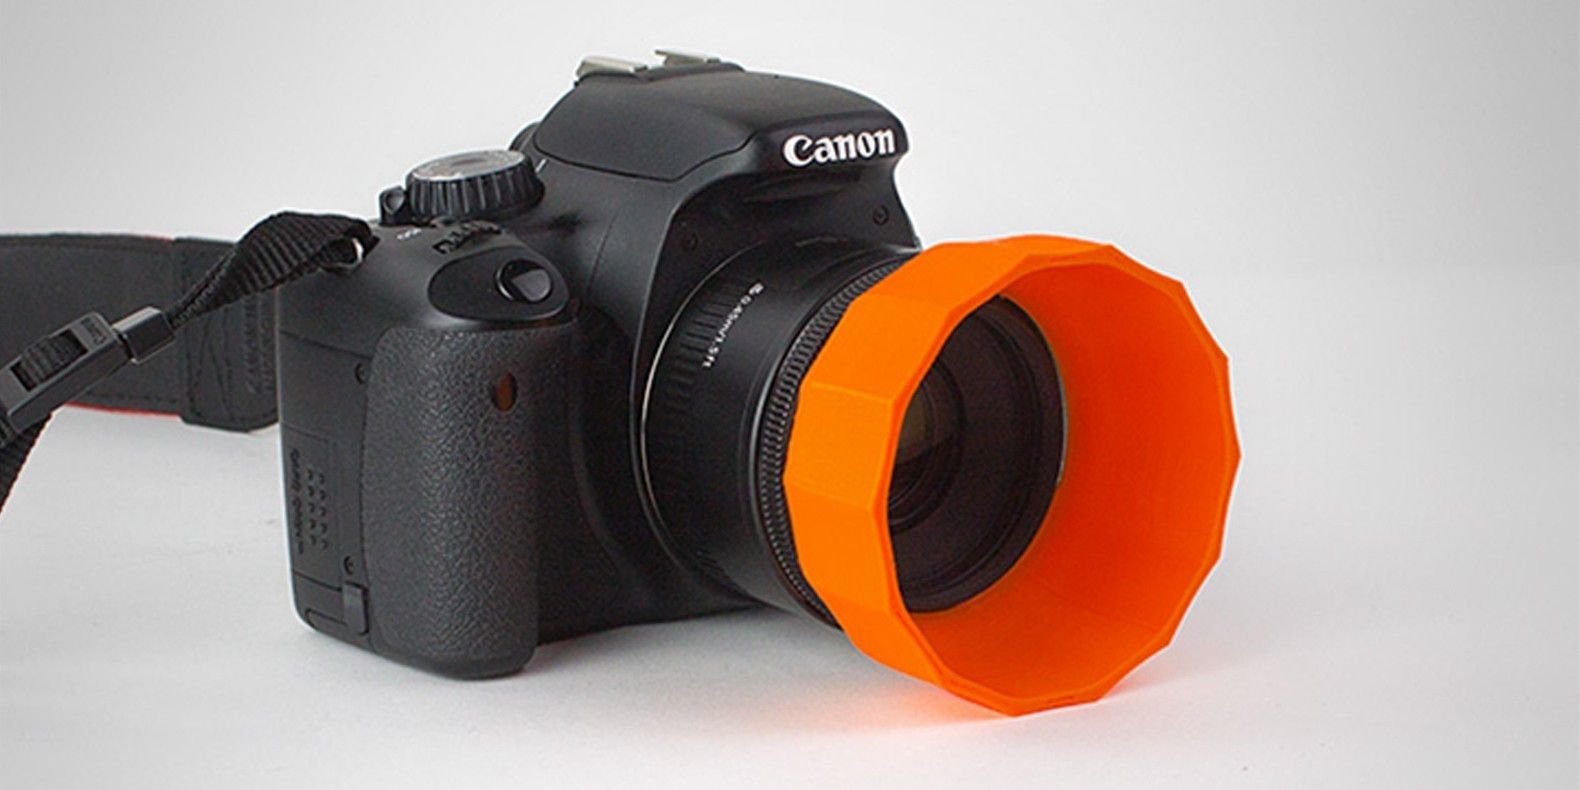 Find here a selection of the best camera related 3D models to make with a 3D printer